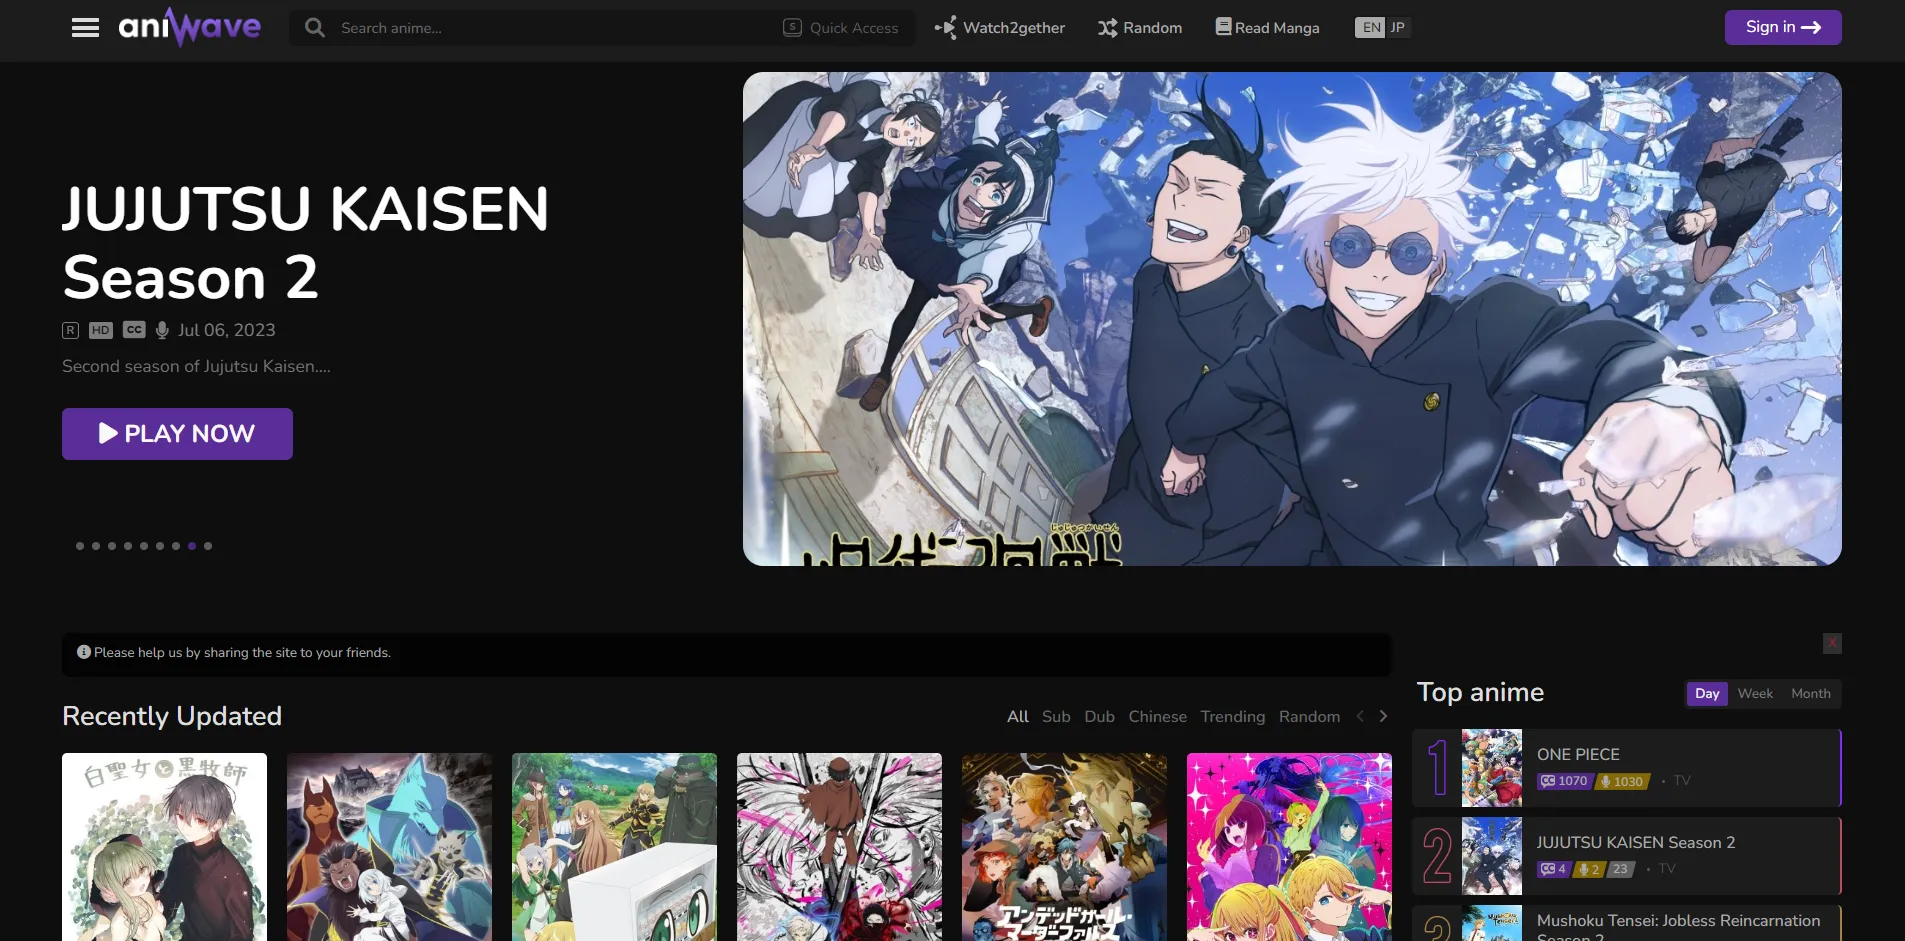 Anime streaming site Aniwave